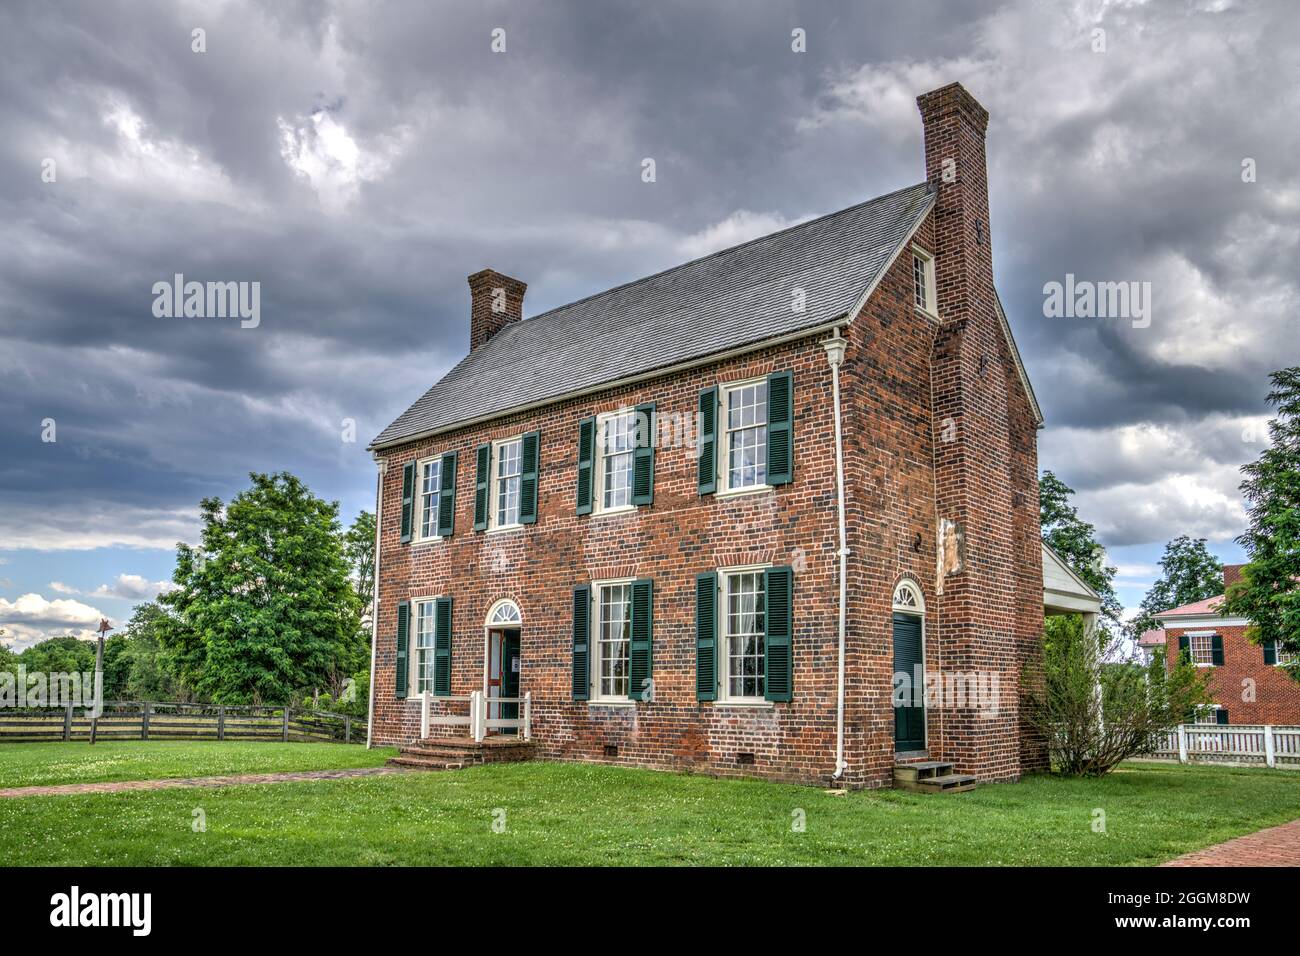 The Pryor Wright House at the Appomattox Court House National Historical Park in Virginia. Stock Photo